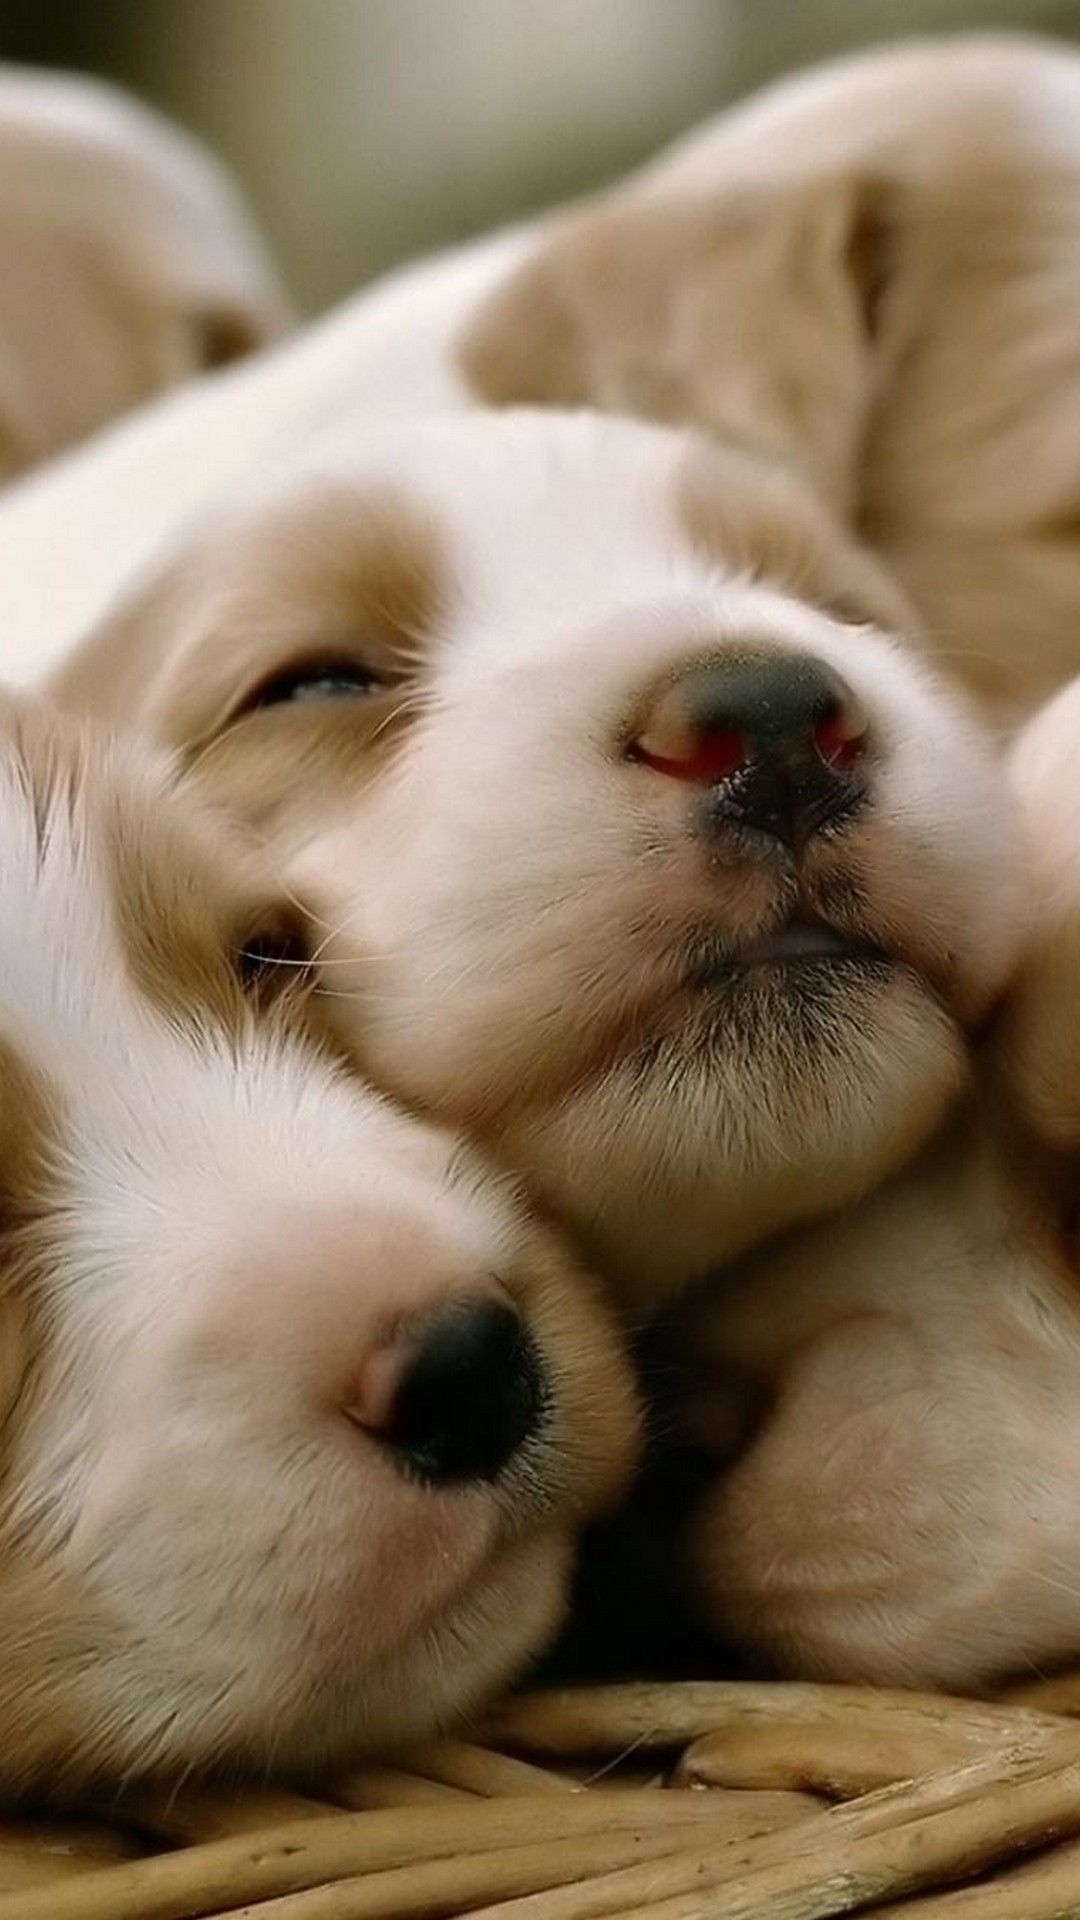 Pics Of Puppies Wallpaper For iPhone resolution 1080x1920